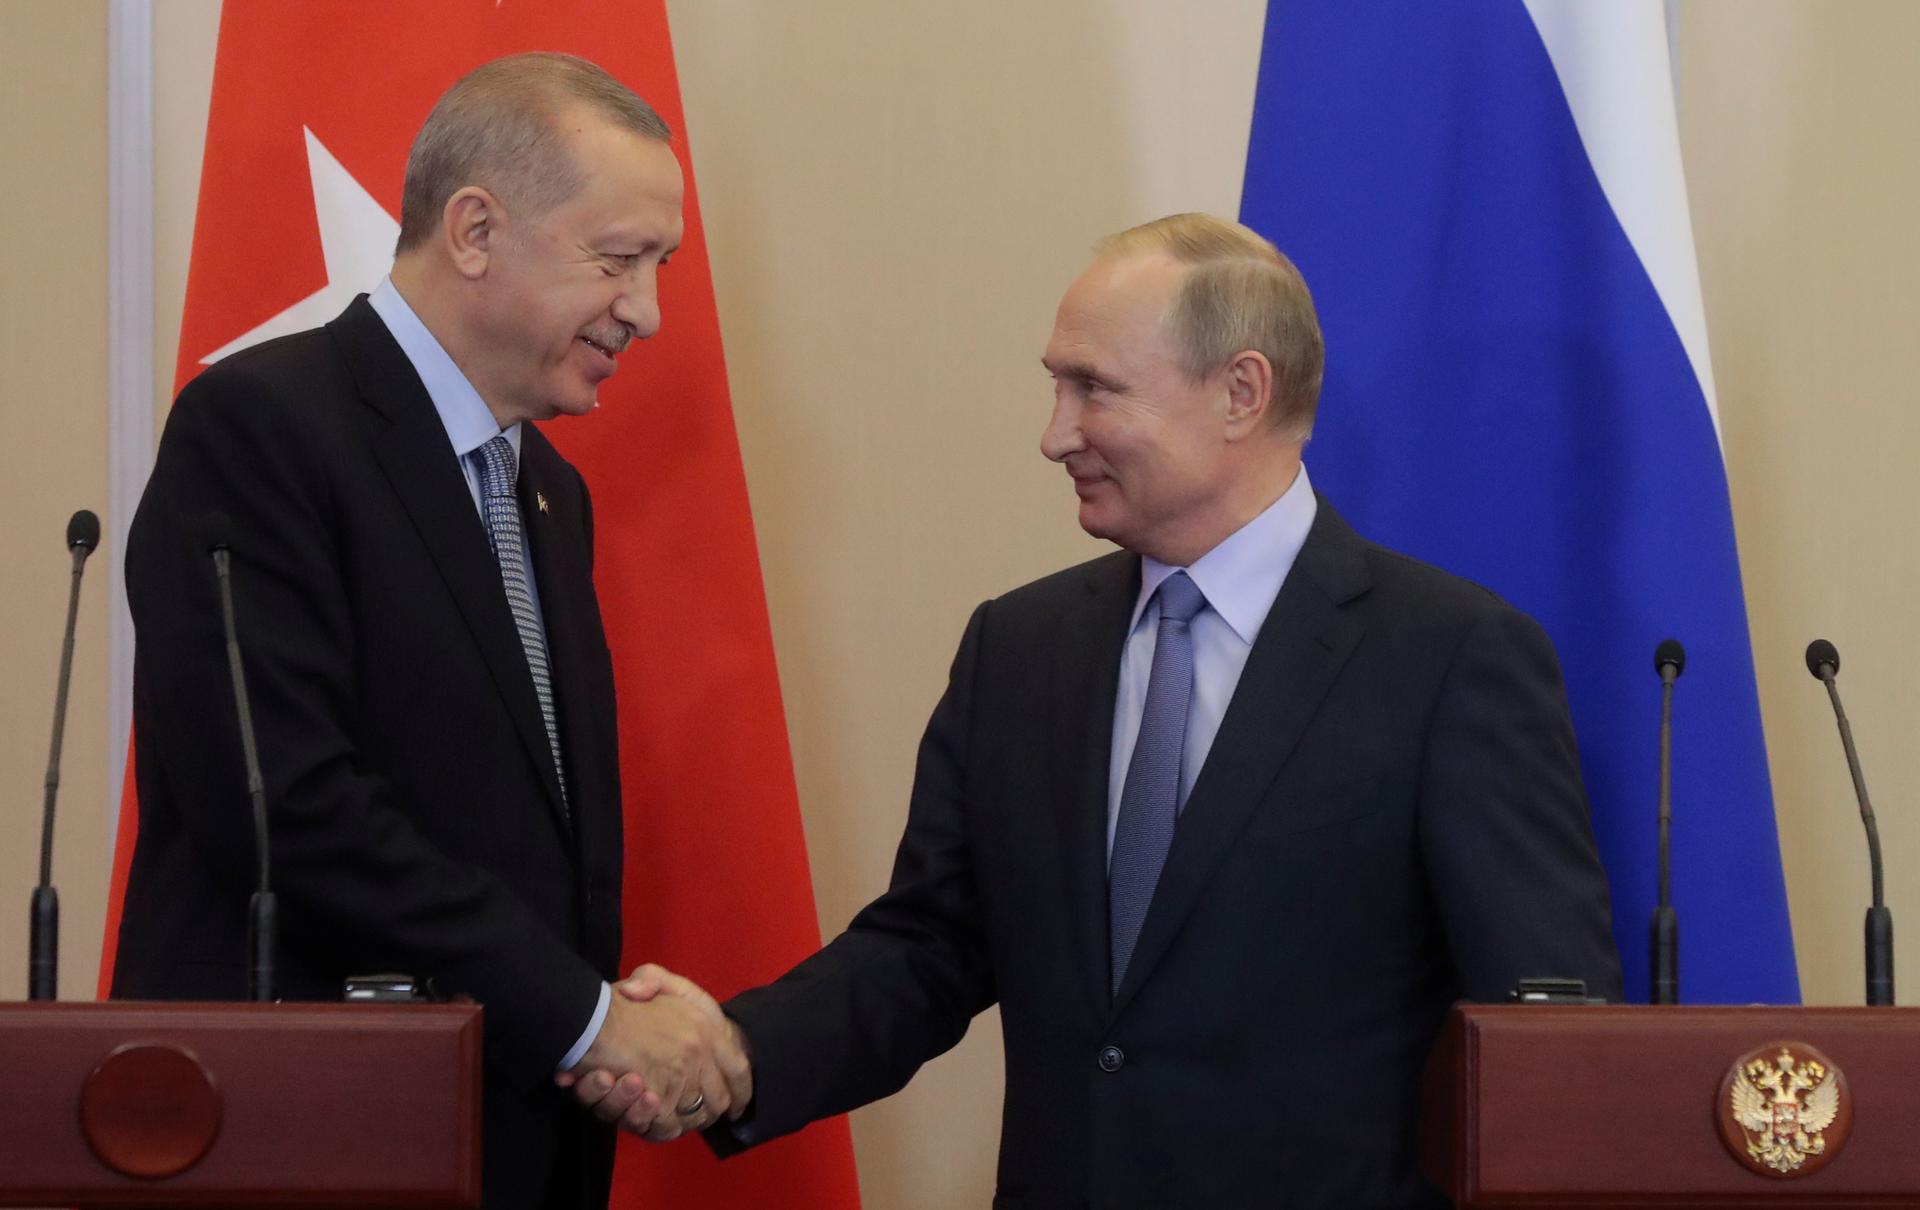 Russian President Vladimir Putin, right, shakes hands with Turkish President Recep Tayyip Erdogan, left, during their joint news conference following Russian-Turkish talks in the Black sea resort of Sochi, Russia, on October 22, 2019.